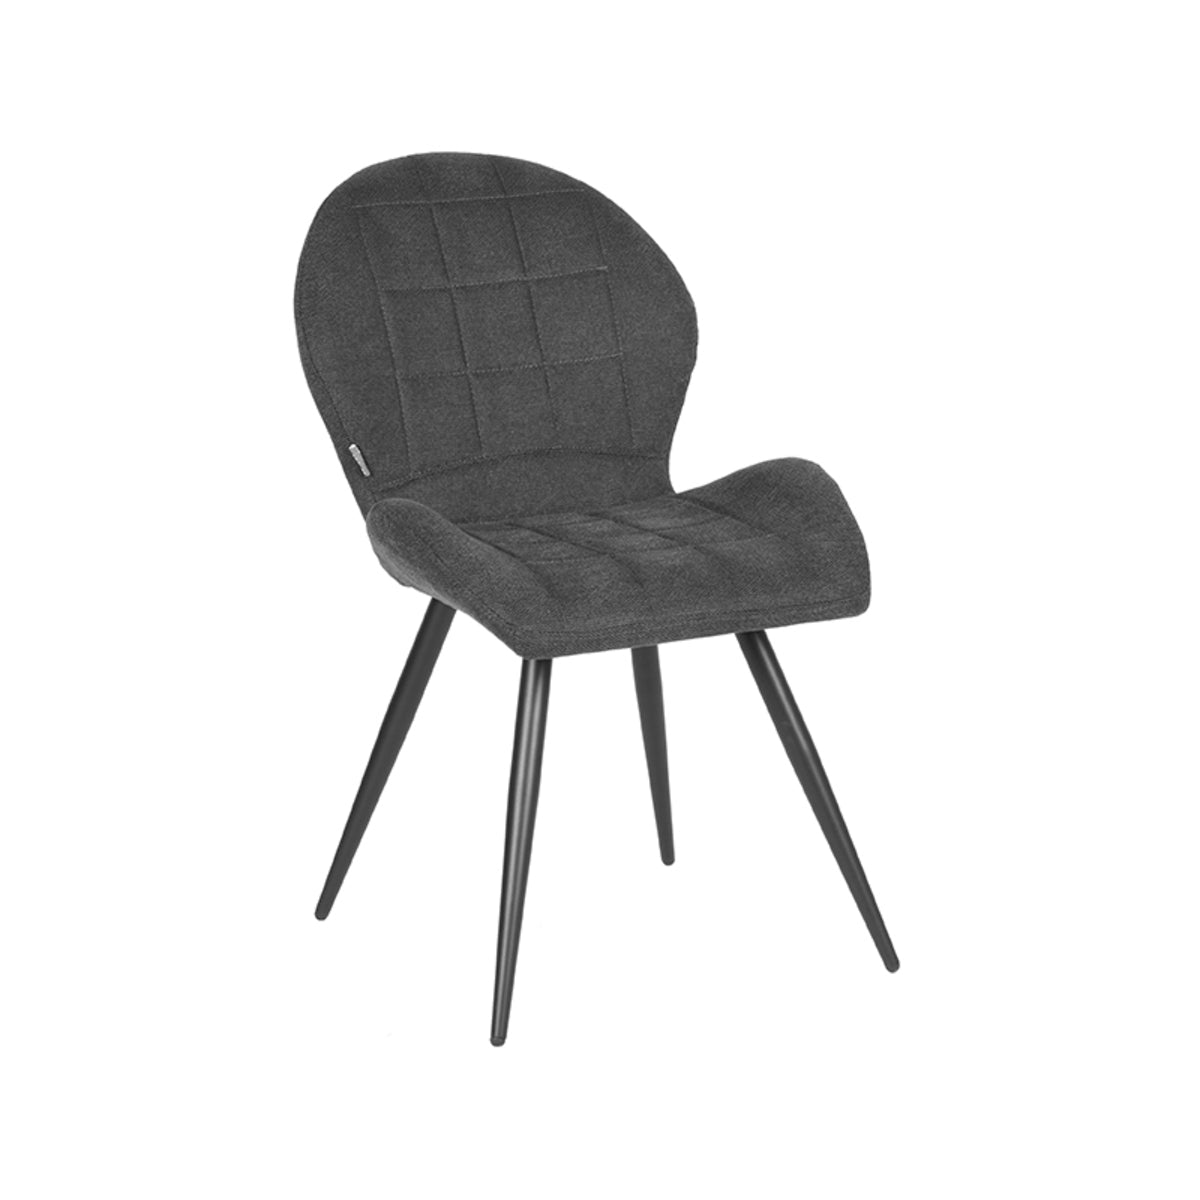 LABEL51 Dining room chair Sil - Anthracite - Weave | 2 pcs